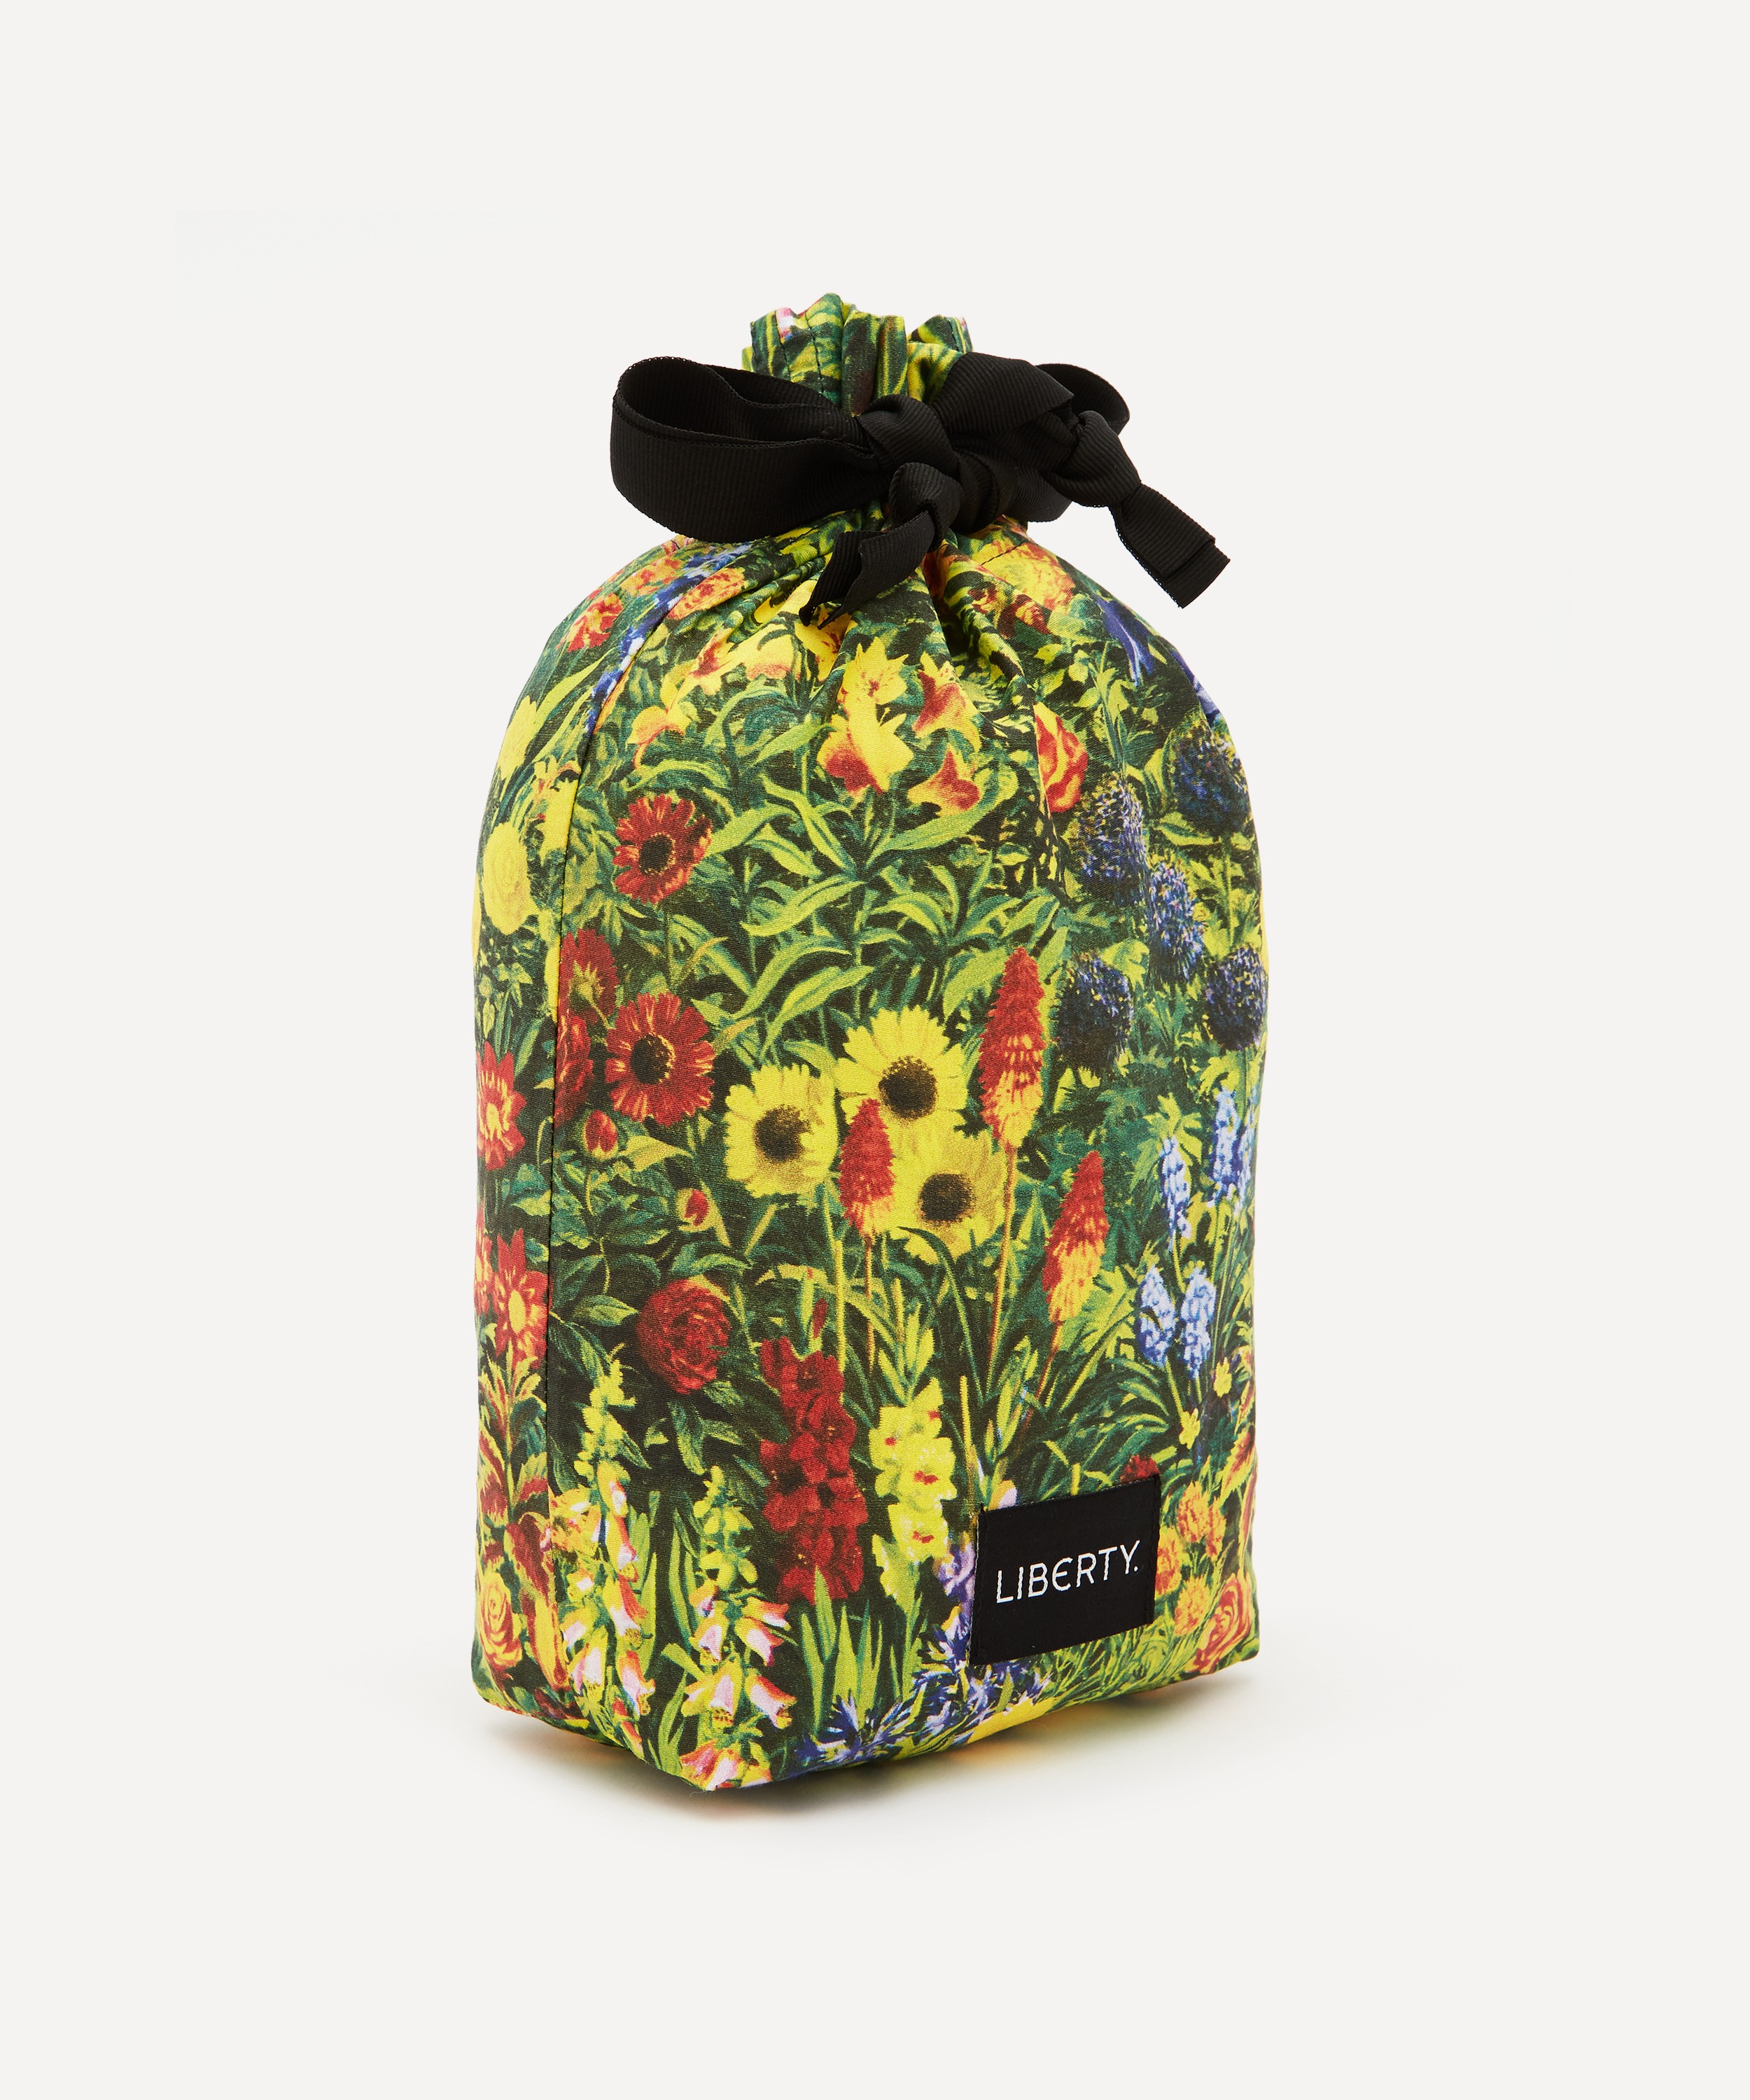 GUCCI Bloom Beauty Fabric Bag Drawstring Pouch NEW